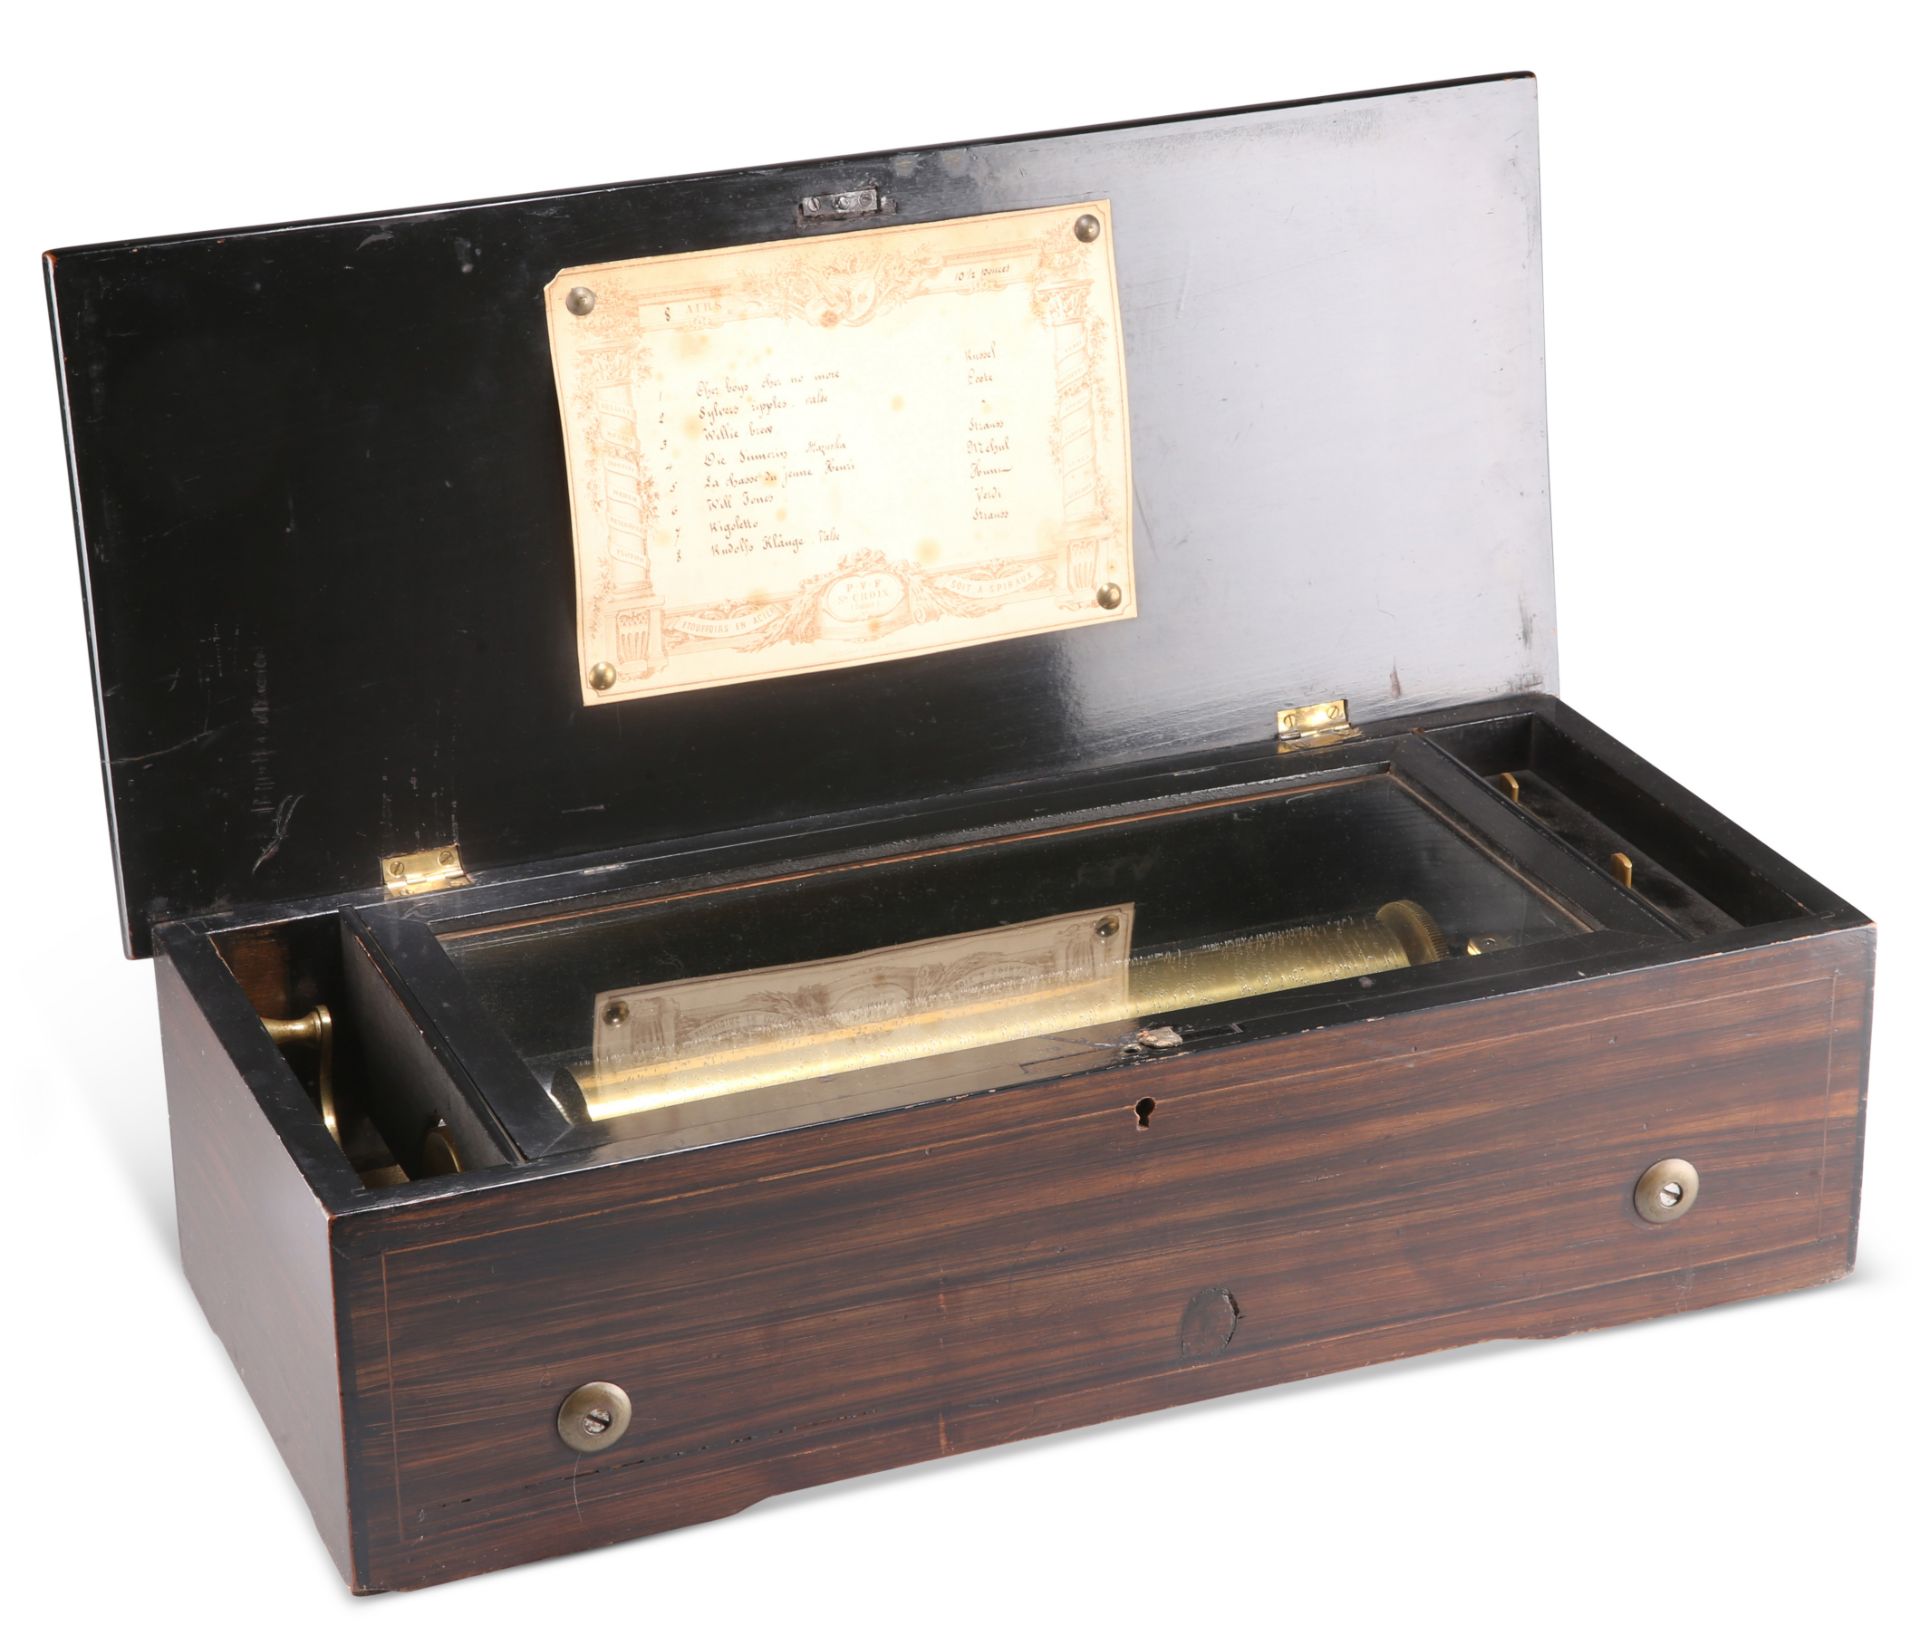 A LATE 19TH CENTURY INLAID ROSEWOOD CYLINDER MUSIC BOX, BY PAILLARD VAUCHER ET FILS (P.V.F.) - Image 2 of 8